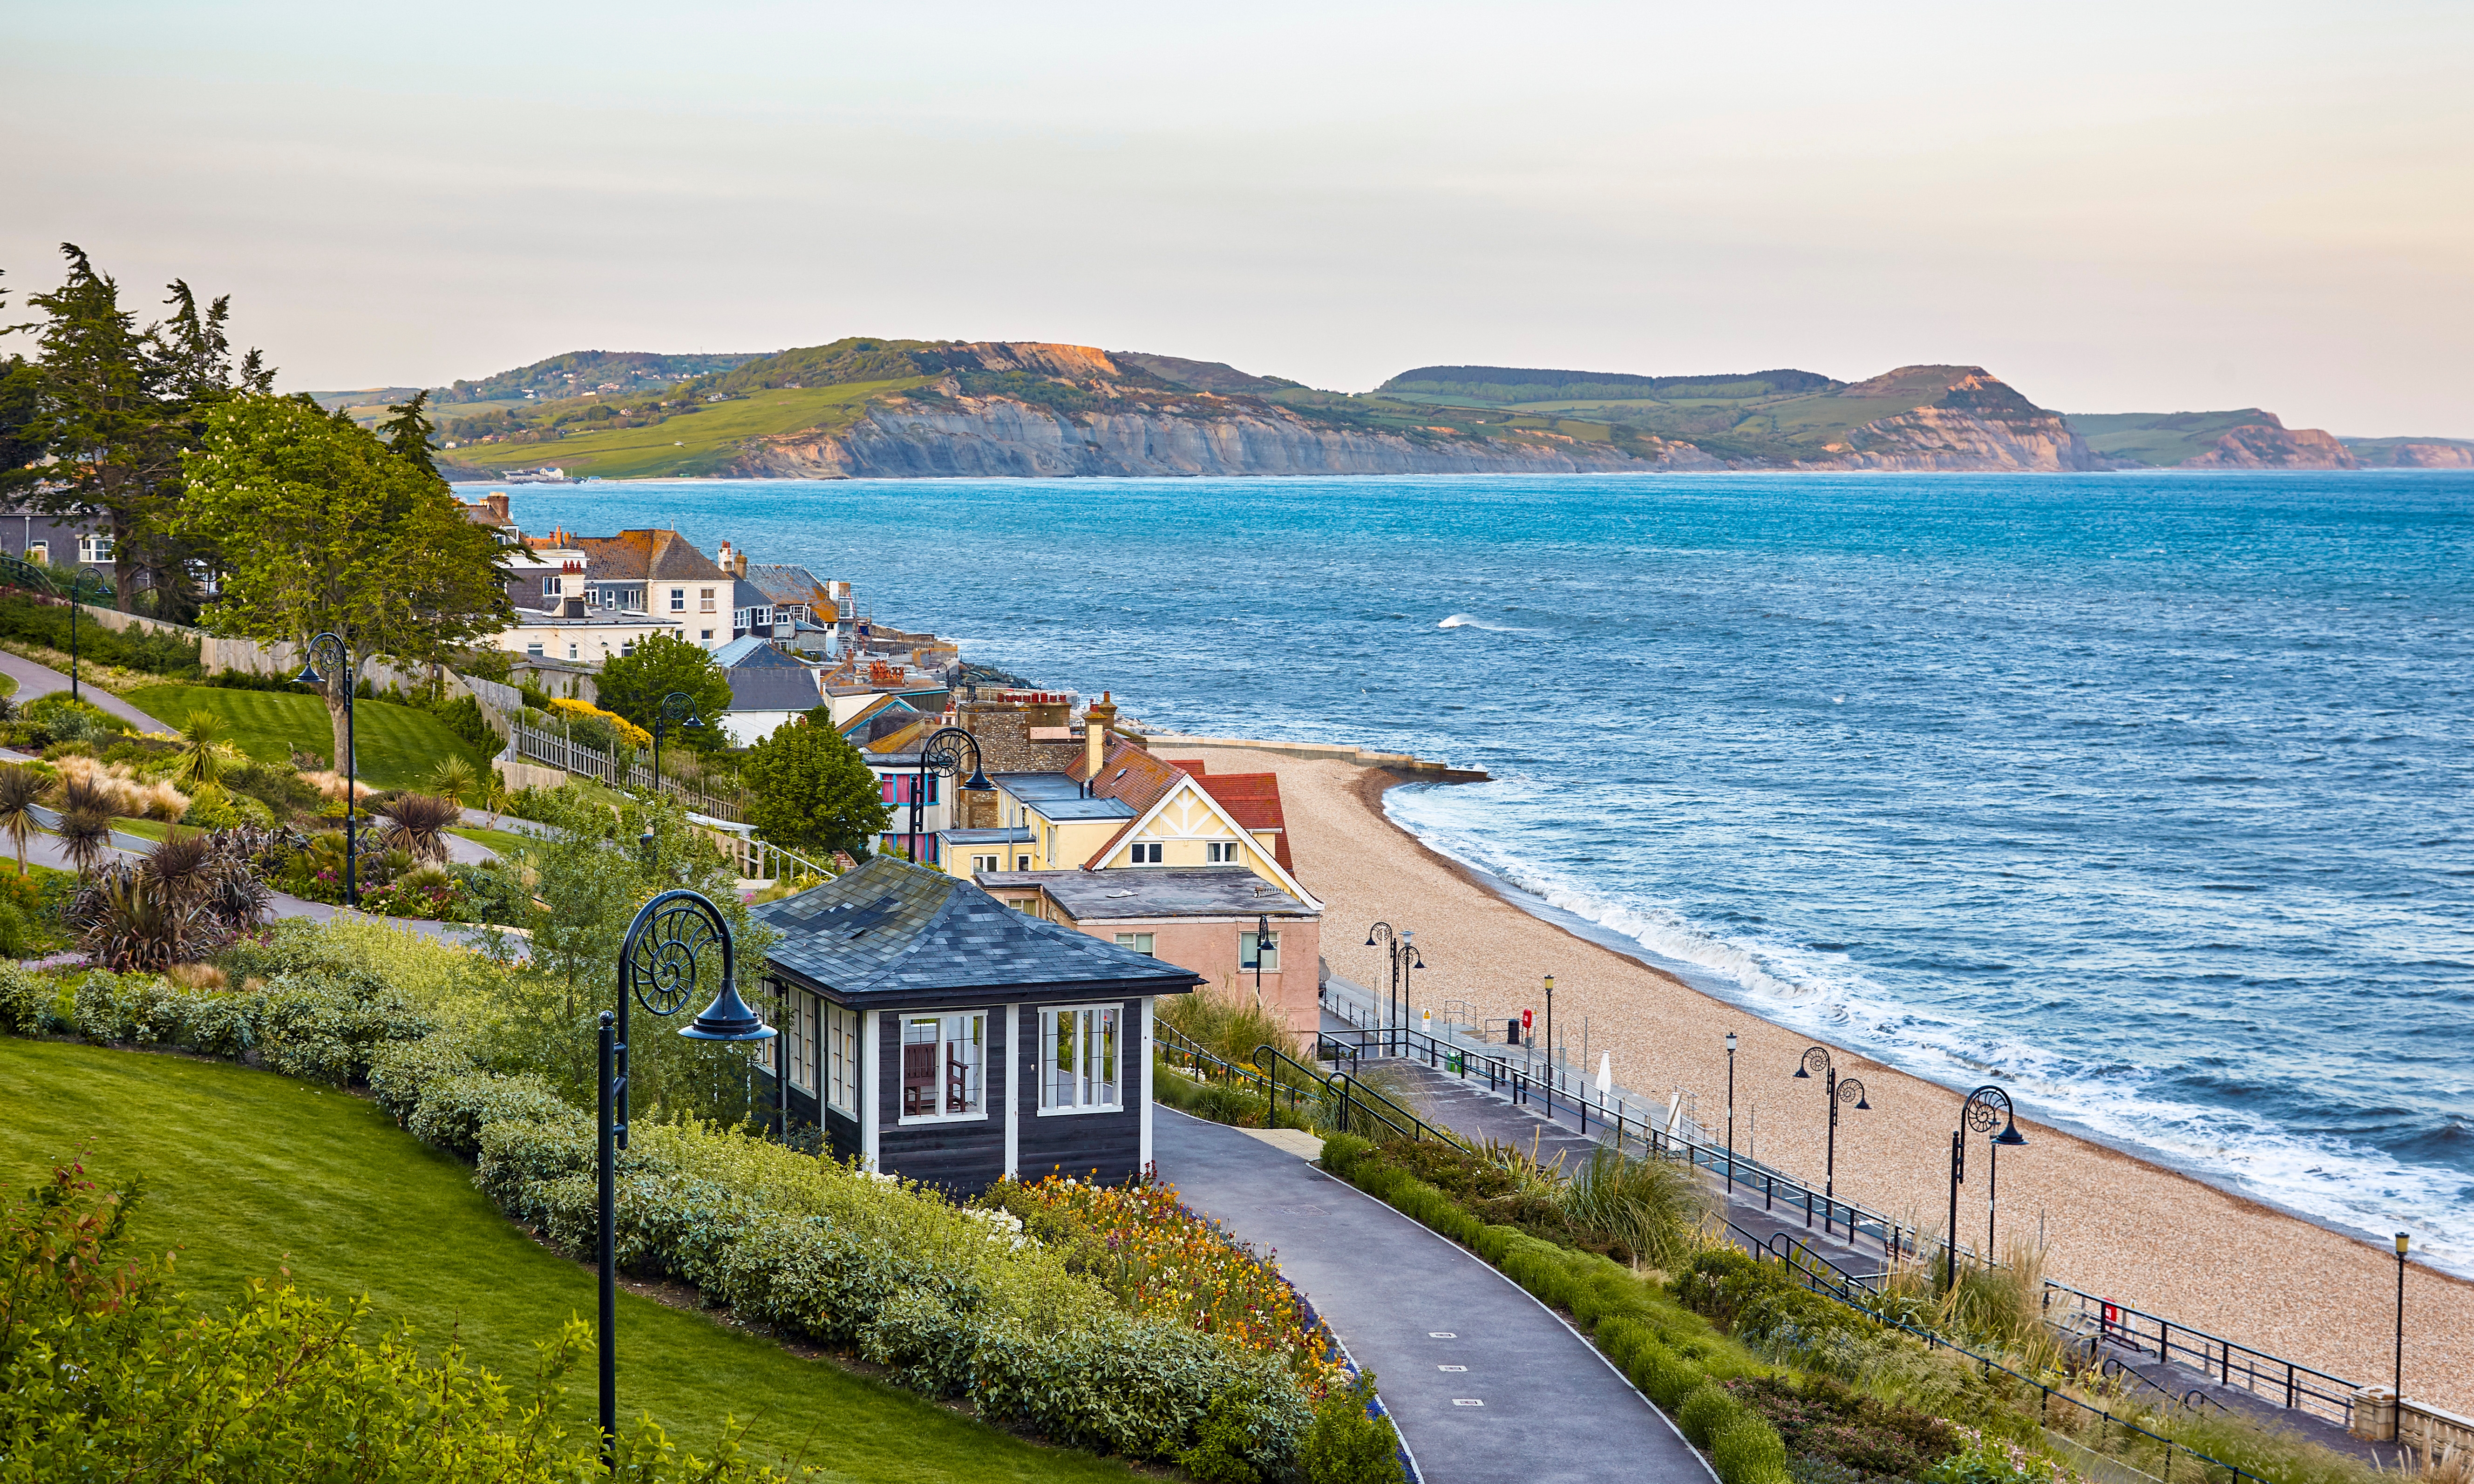 500+ Lyme Regis Holiday Cottages, Houses and Apartments